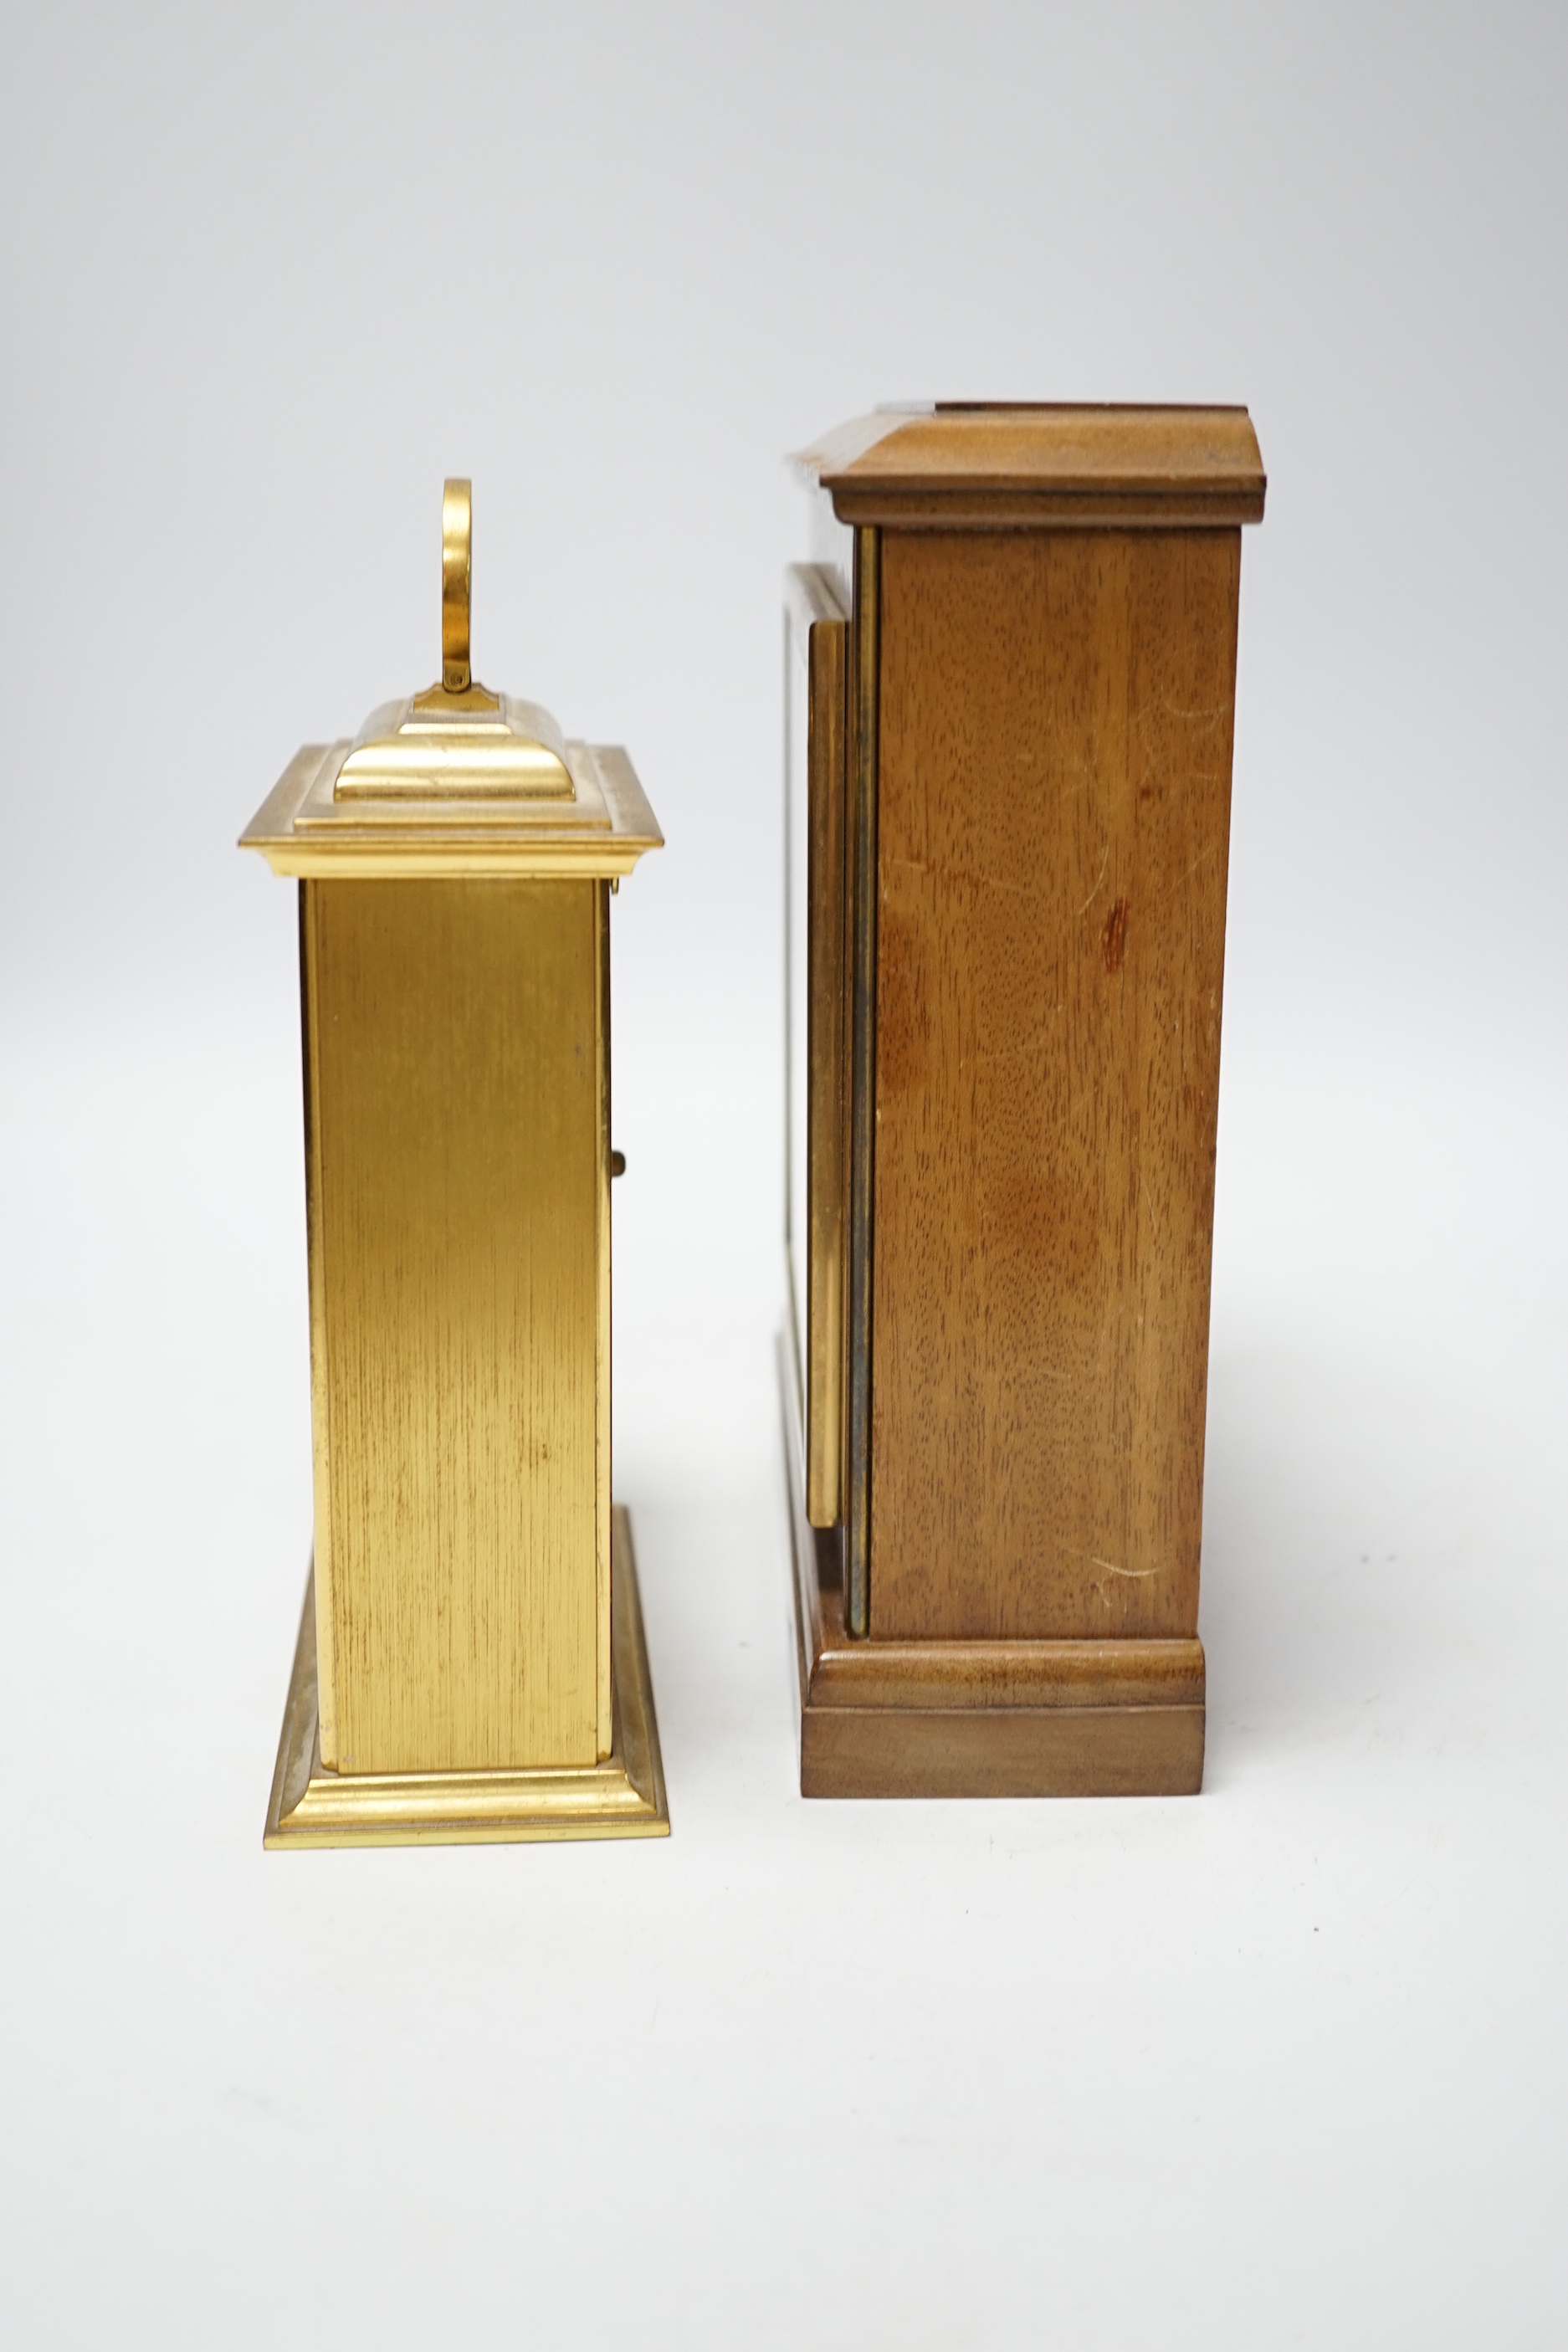 Two modern timepieces, Elliot and Roulet, tallest 23.5cm